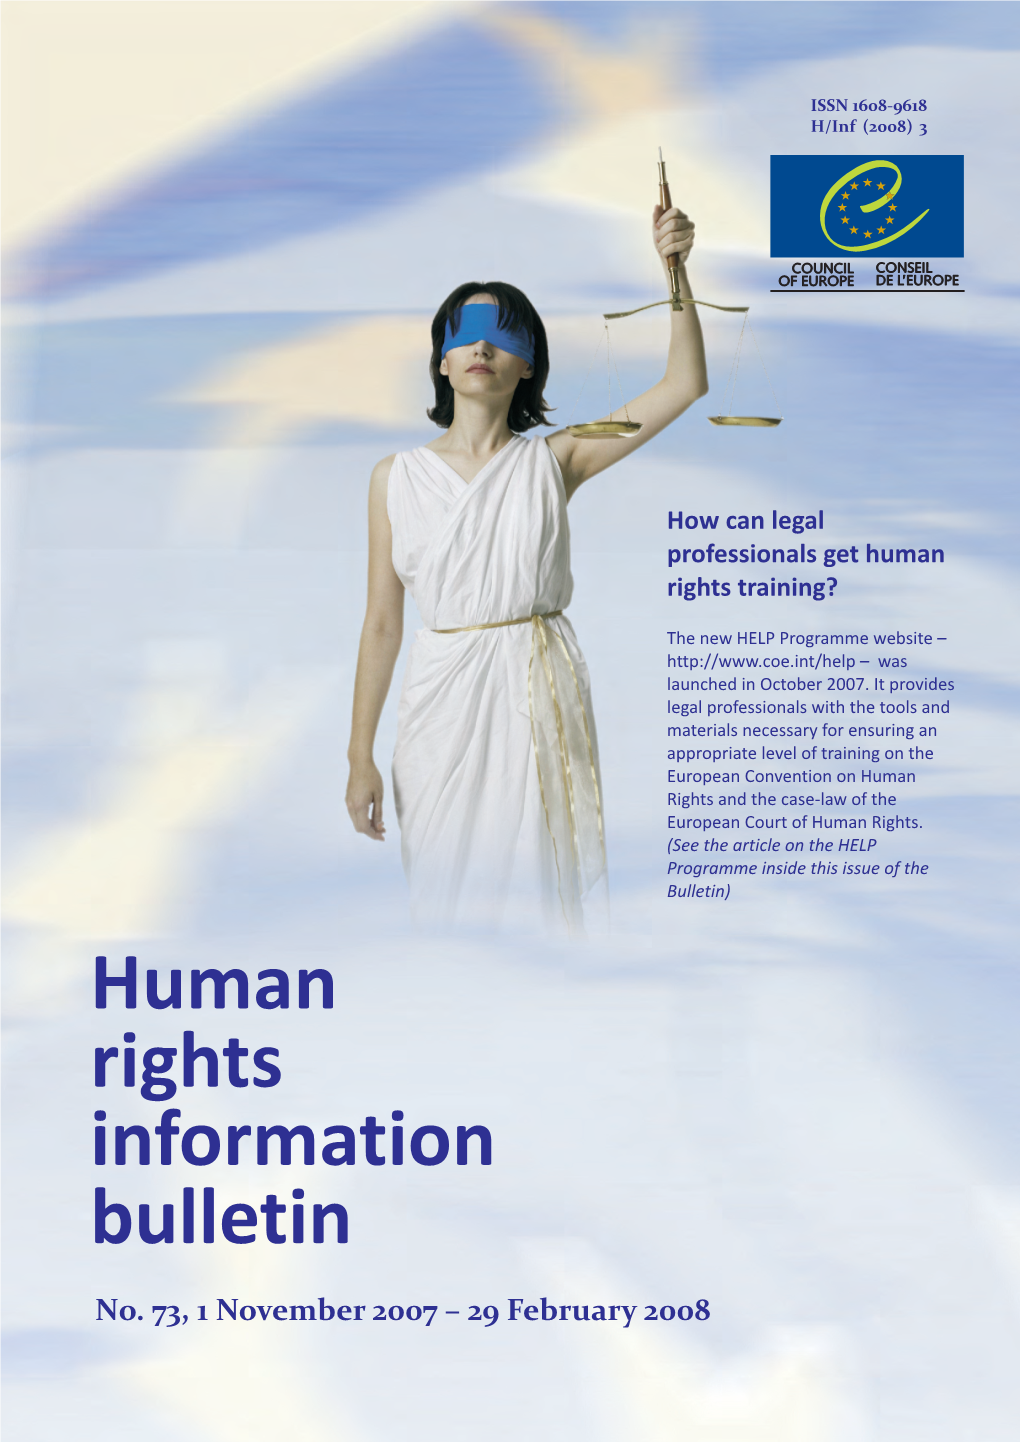 Human Rights Information Bulletin, No. 73 Council of Europe